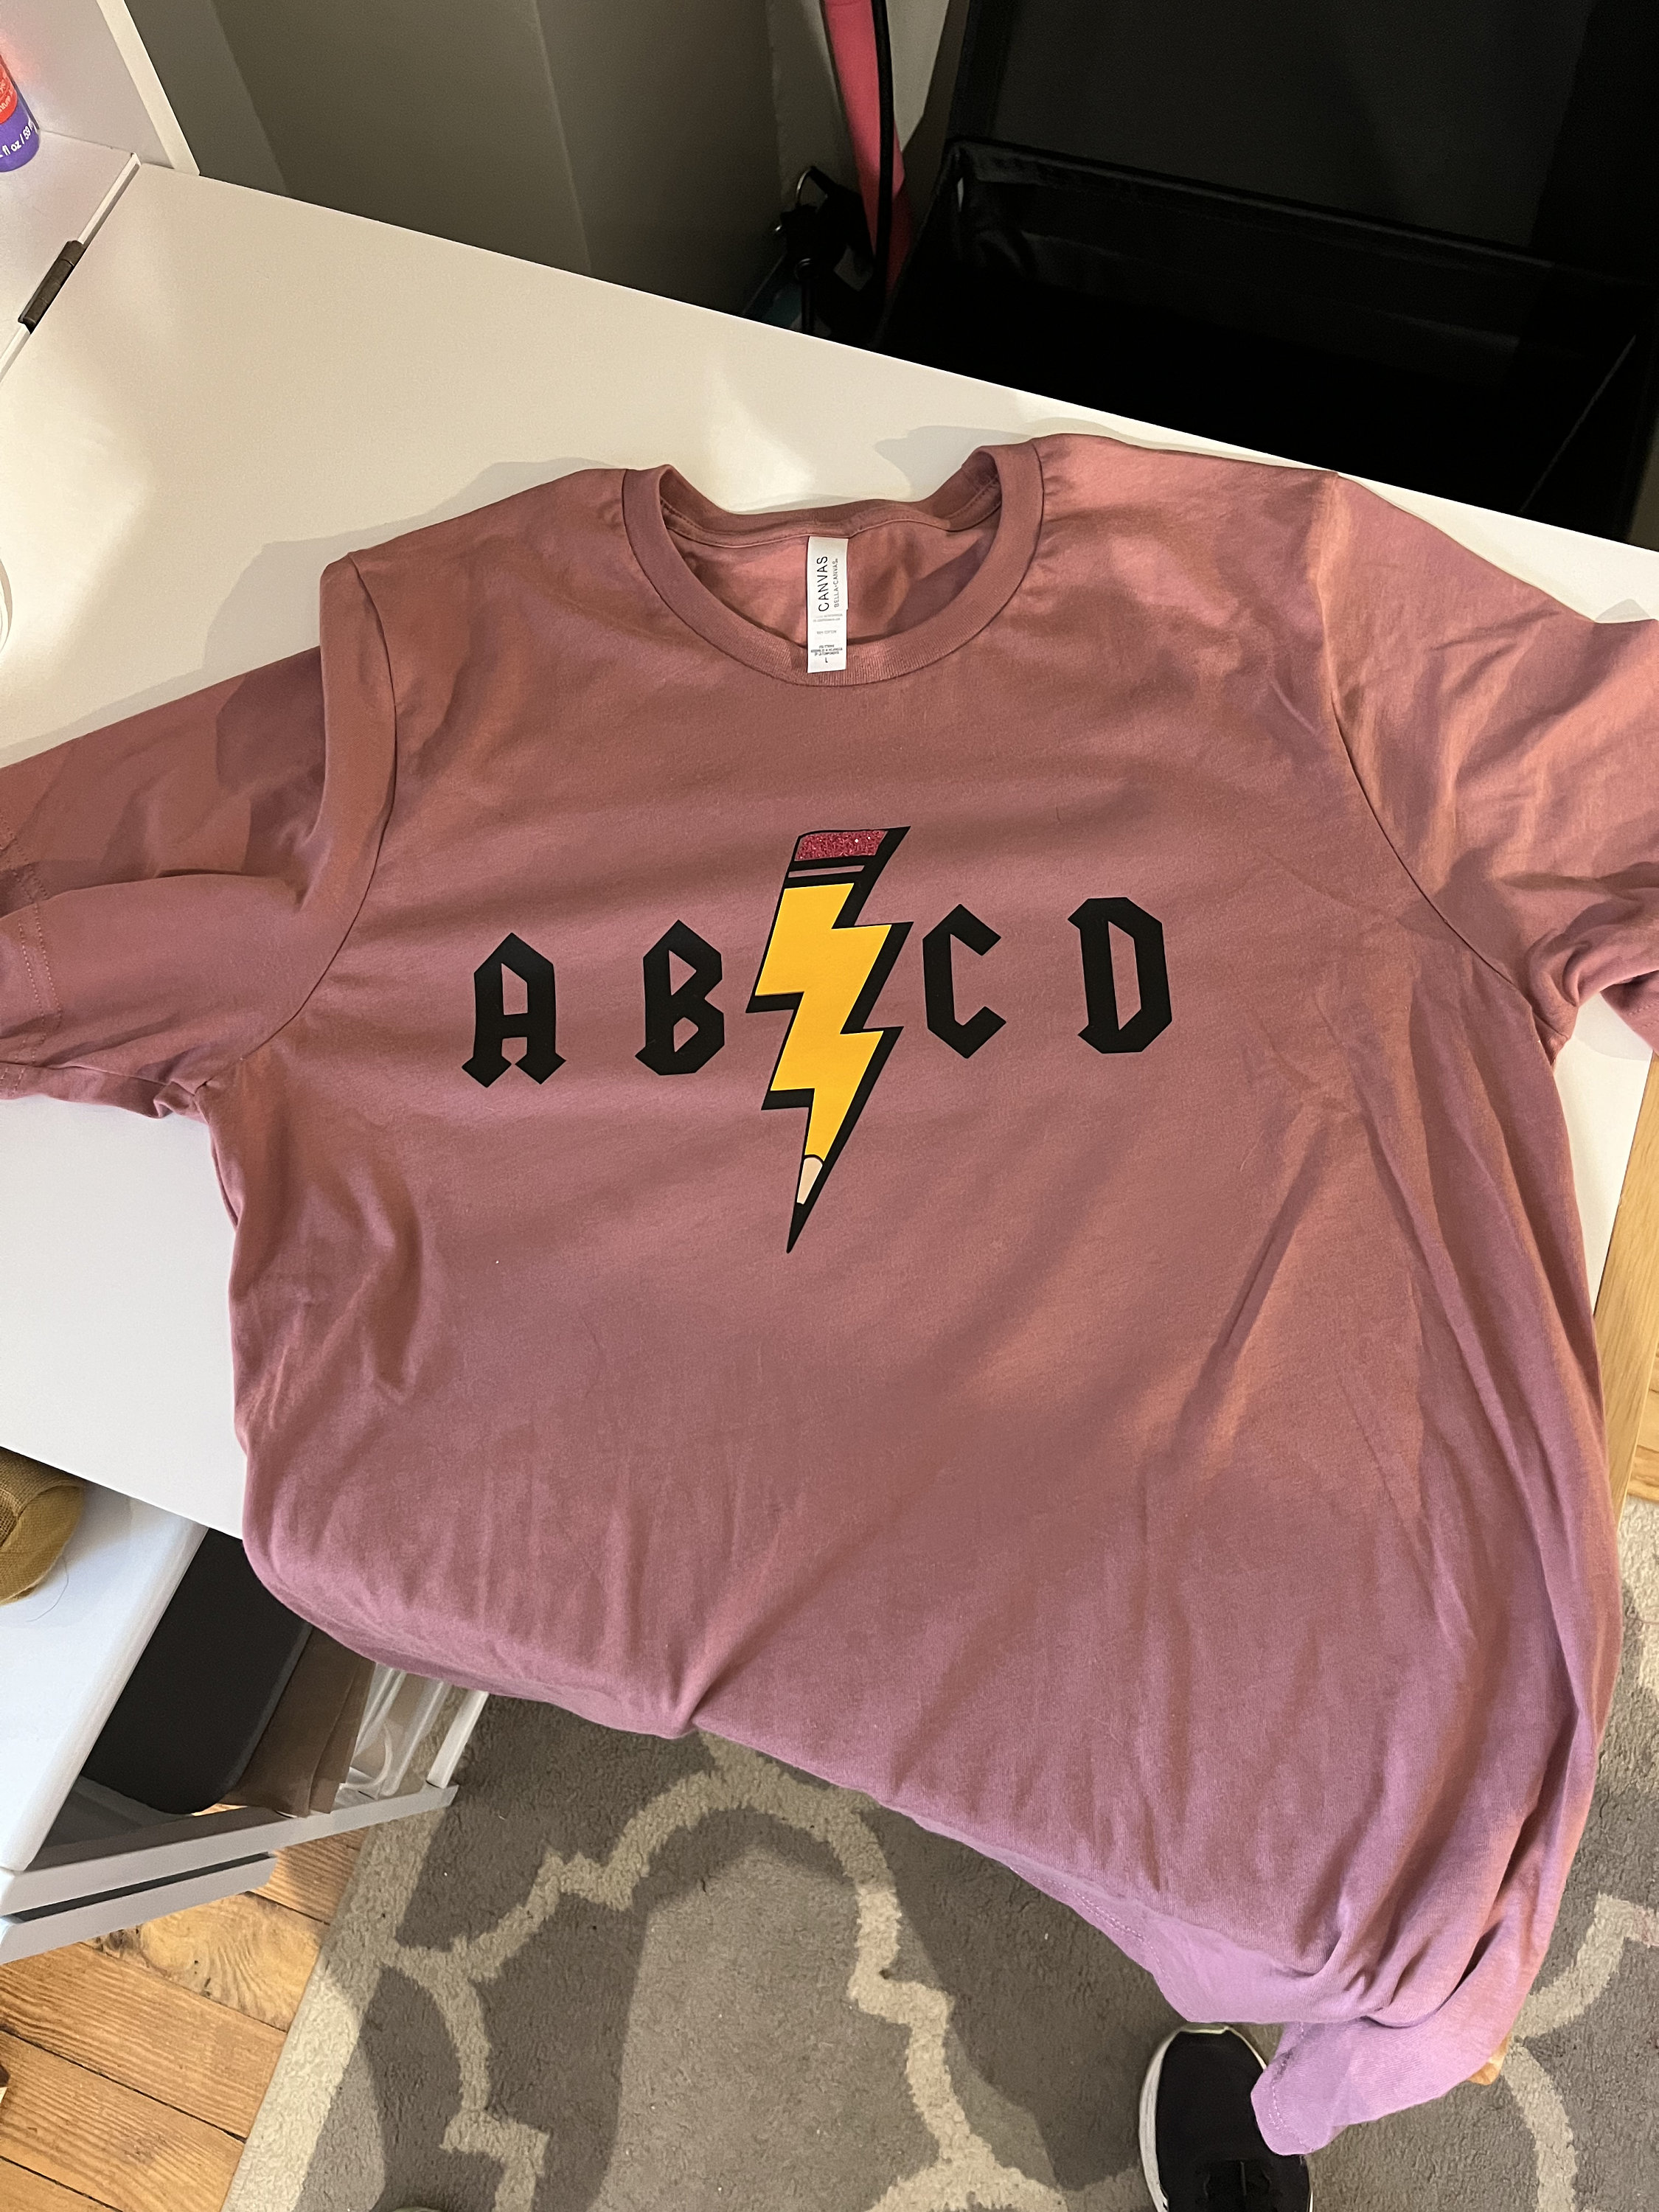 Etsy Ac Abcd Acdc - Dc